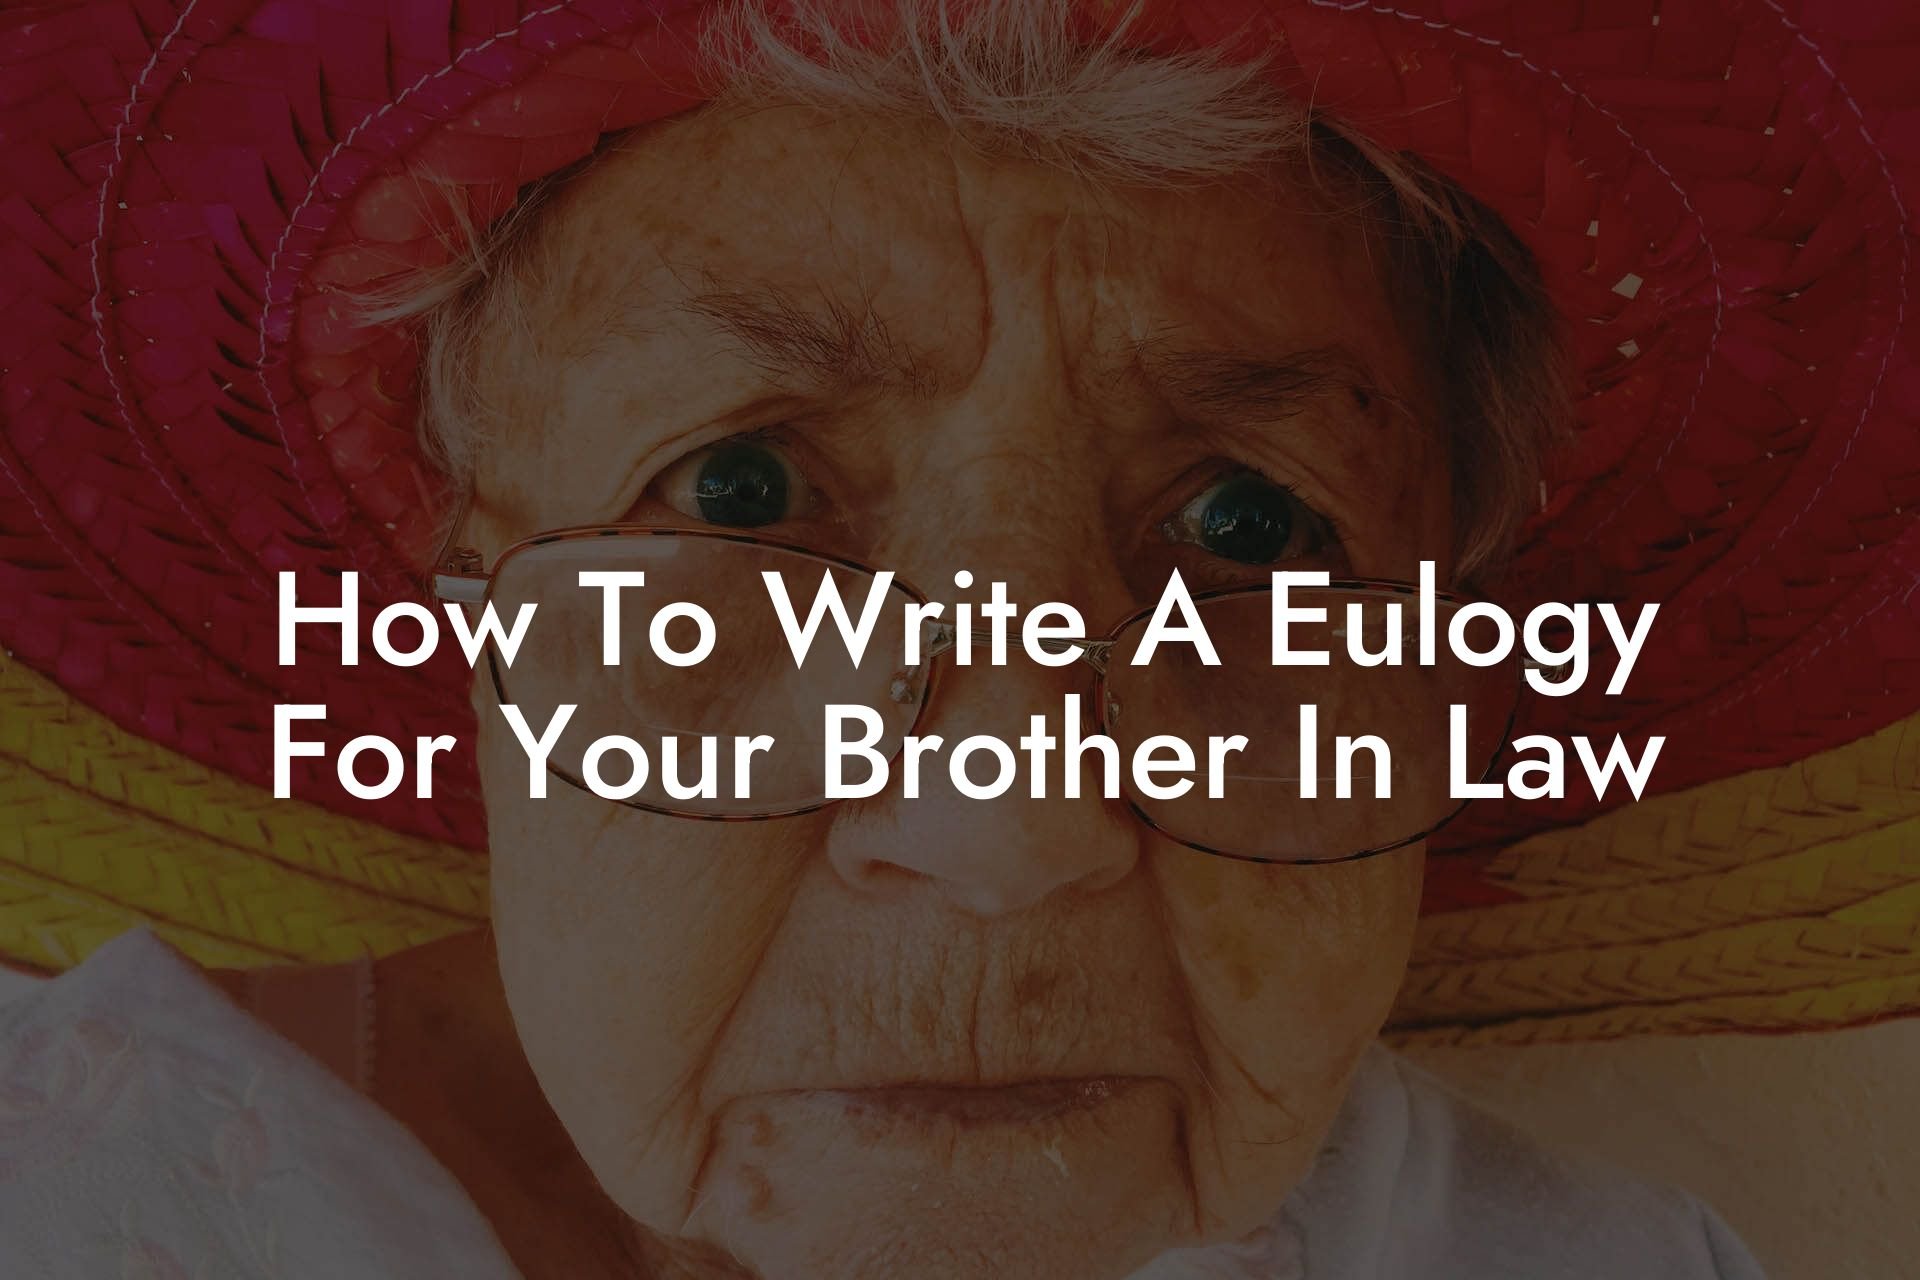 How To Write A Eulogy For Your Brother In Law